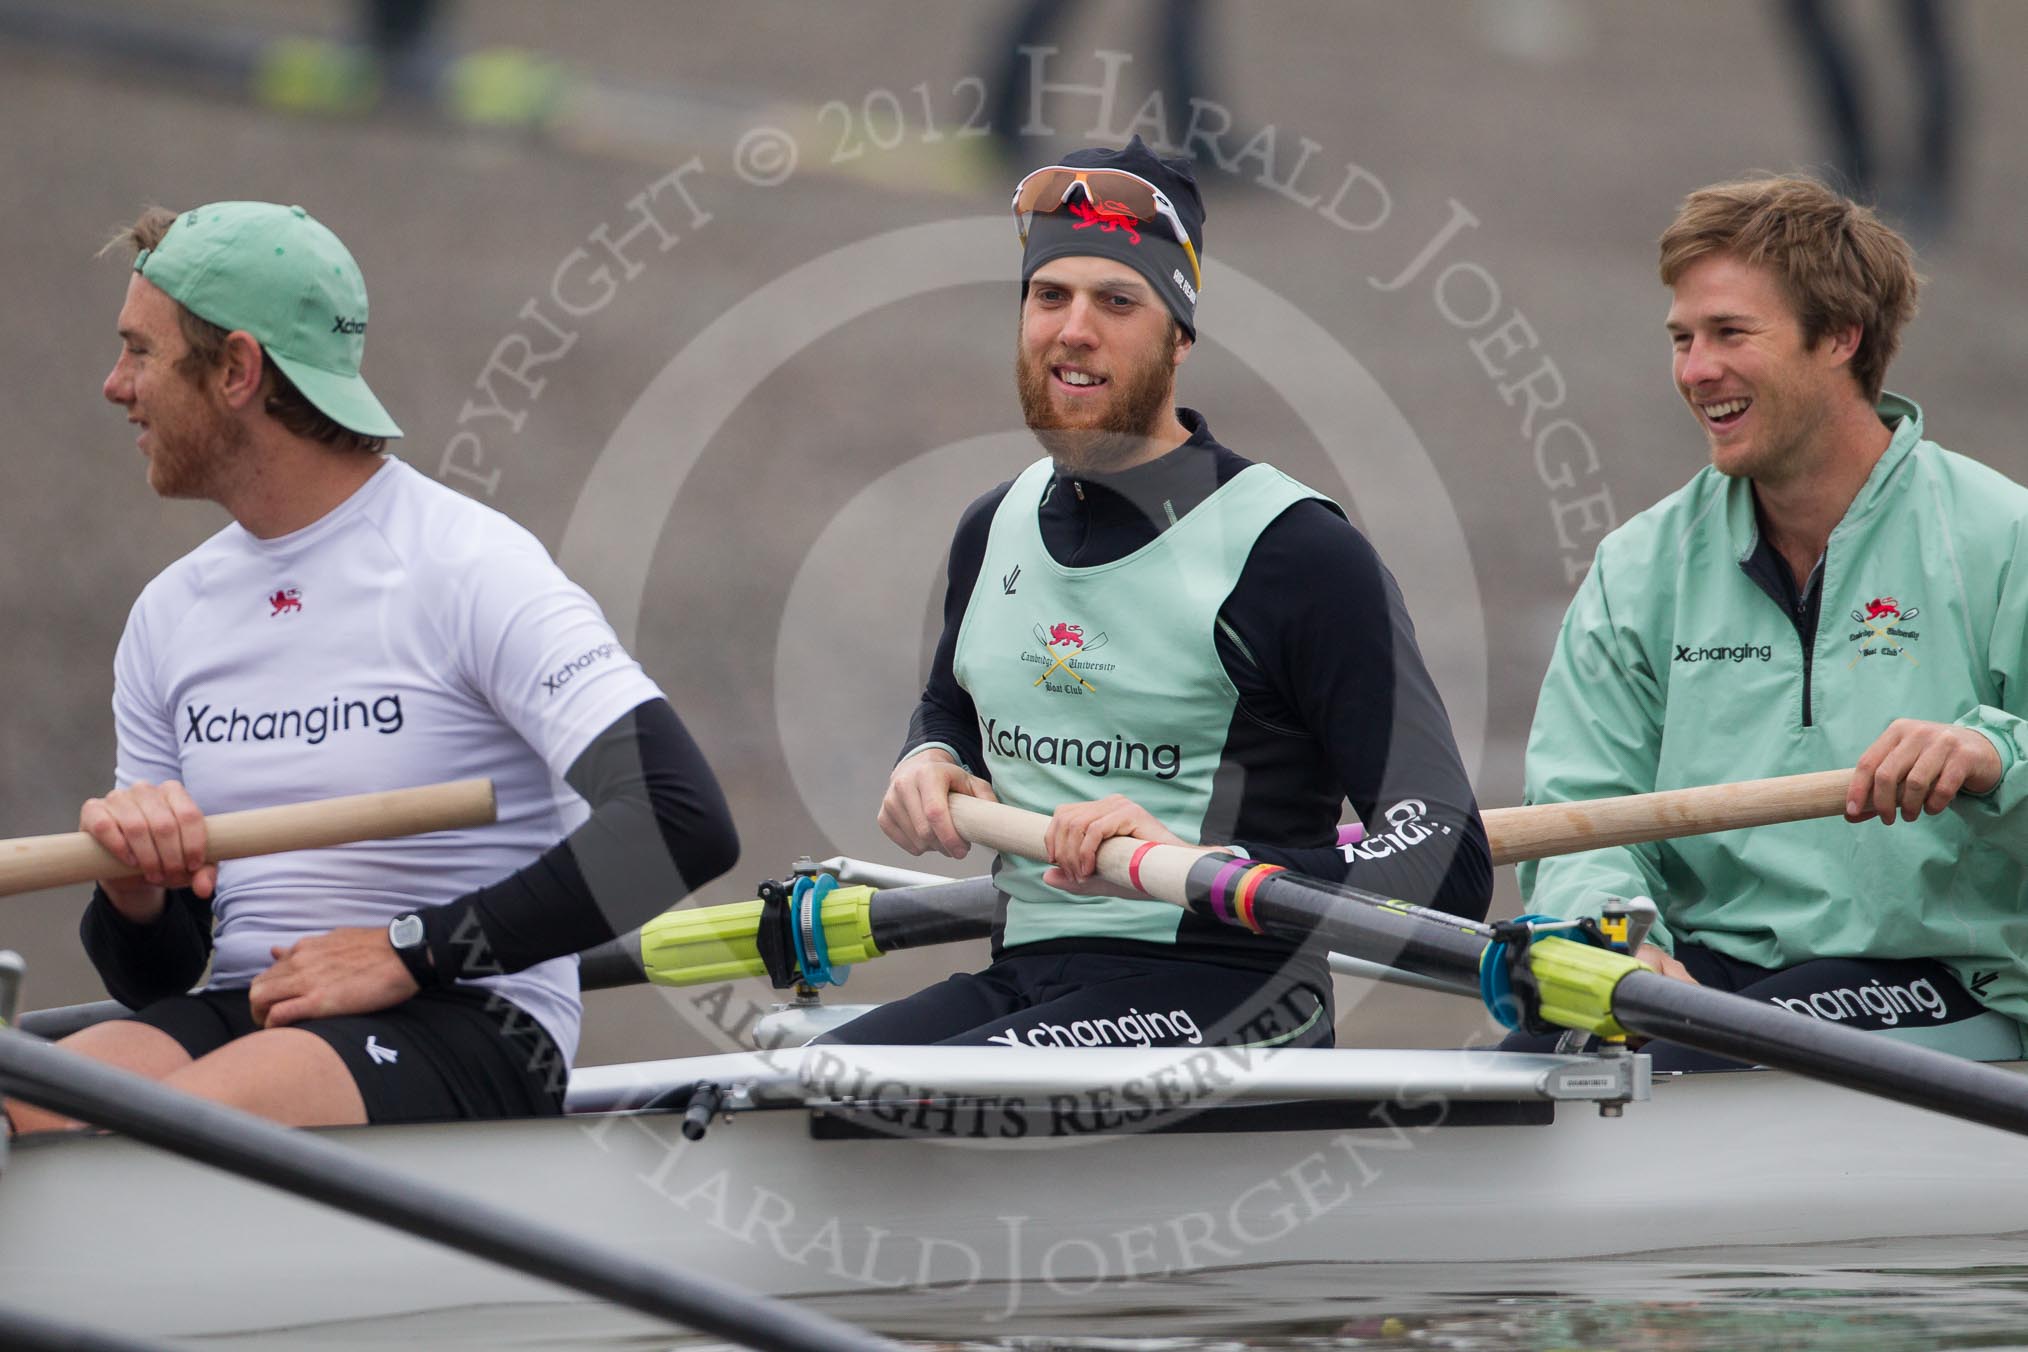 Jack Lindeman, Moritz Schramm, and bow David Nelson in the Cambridge University Boat Club Blue Boat, two days before the 2012 Boat Race.